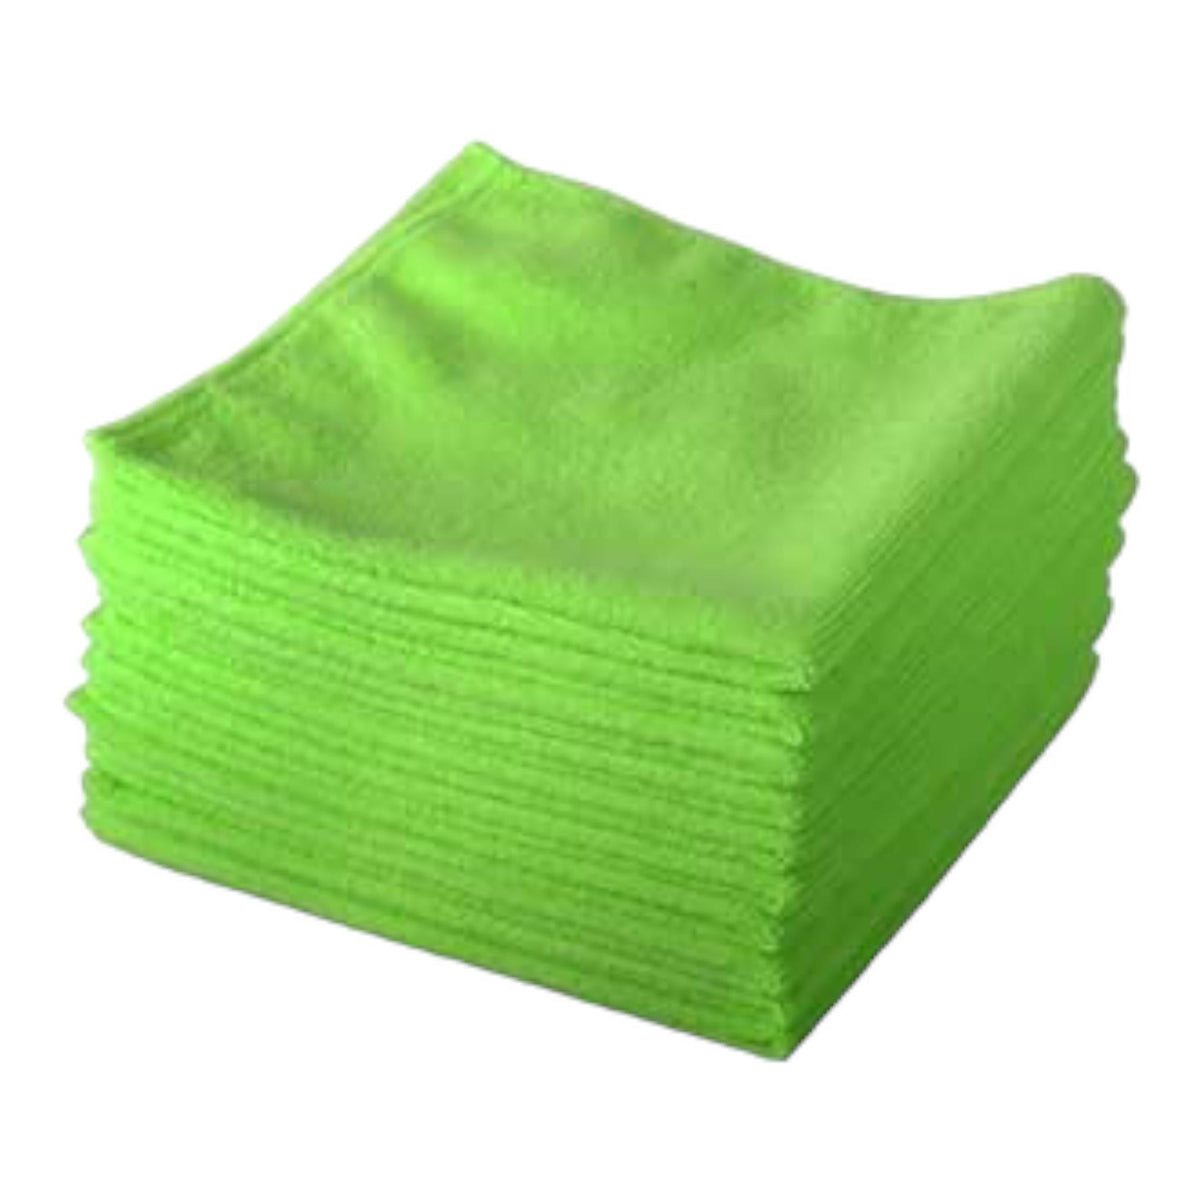 10 Pack of Green Lint Free Microfibre Exel Super Magic Cleaning Cloths For Polishing, Washing, Waxing And Dusting